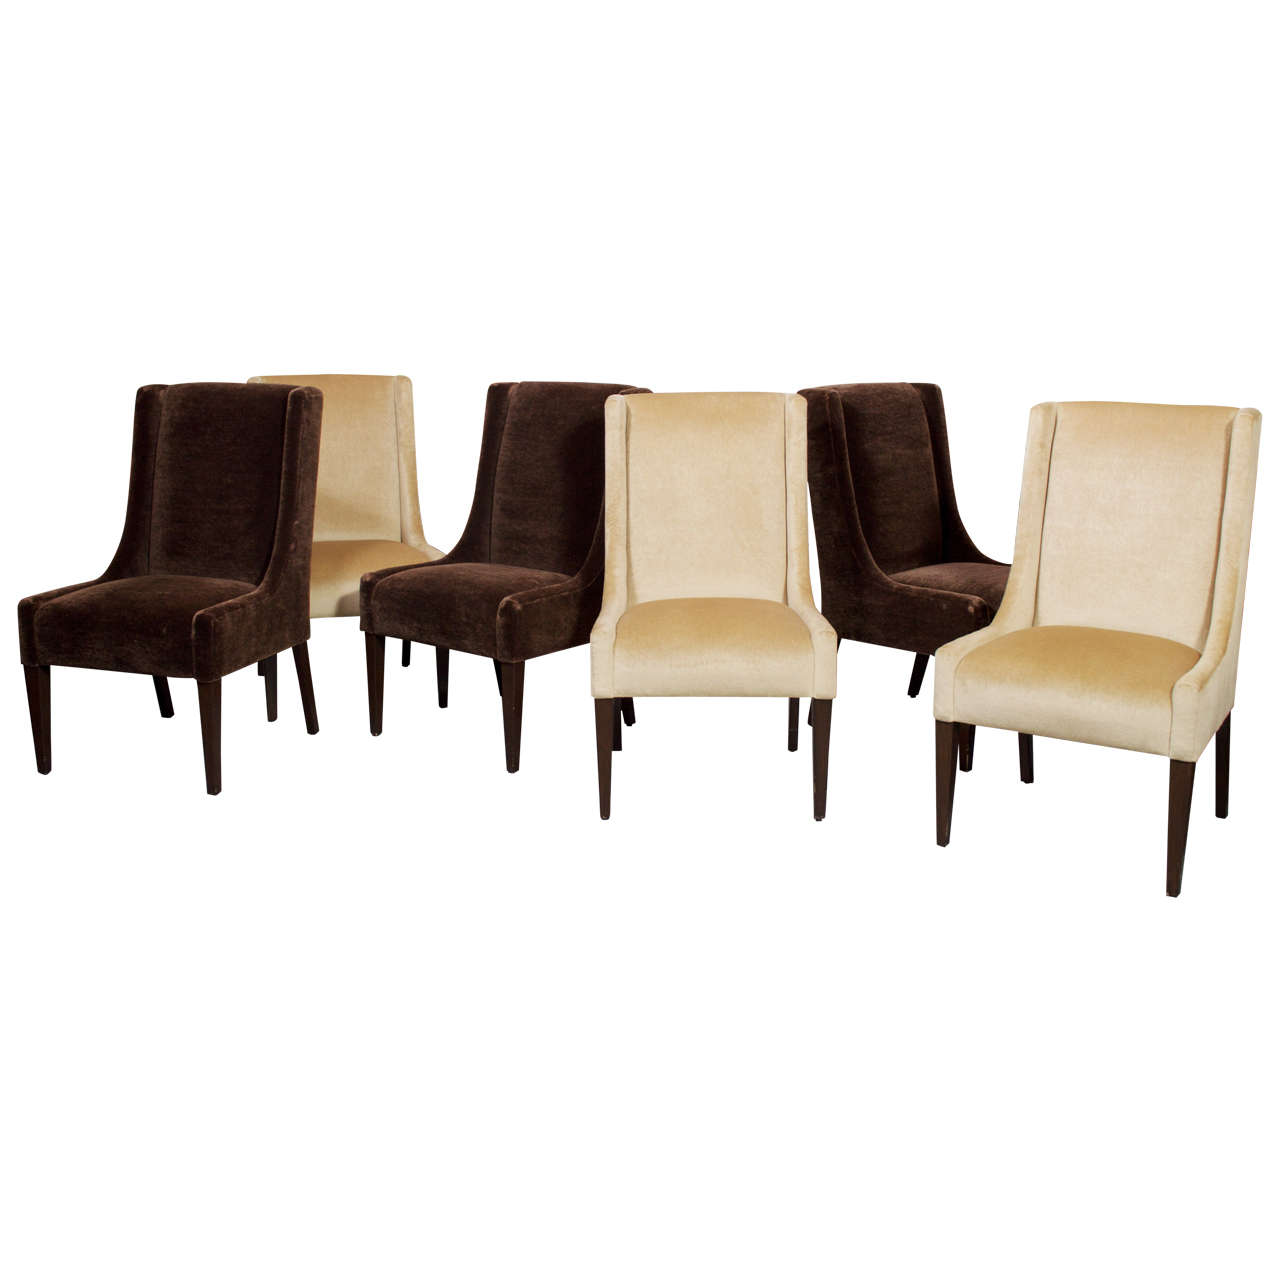 Six A. Rudin Dining and/or Game Chairs In Mohair "Saturday Sale"